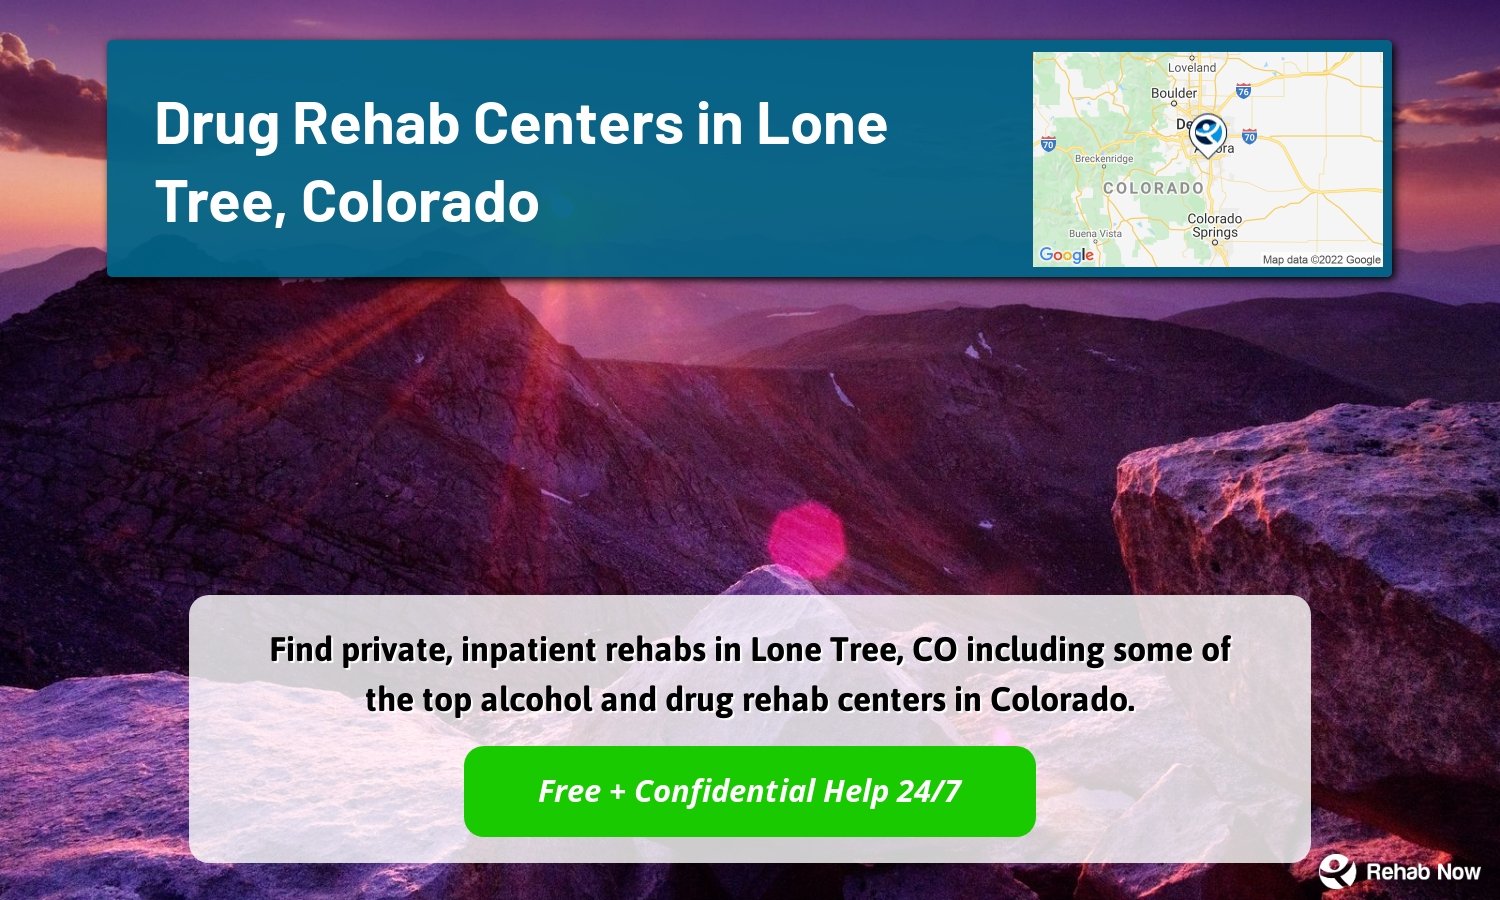 Find private, inpatient rehabs in Lone Tree, CO including some of the top alcohol and drug rehab centers in Colorado.